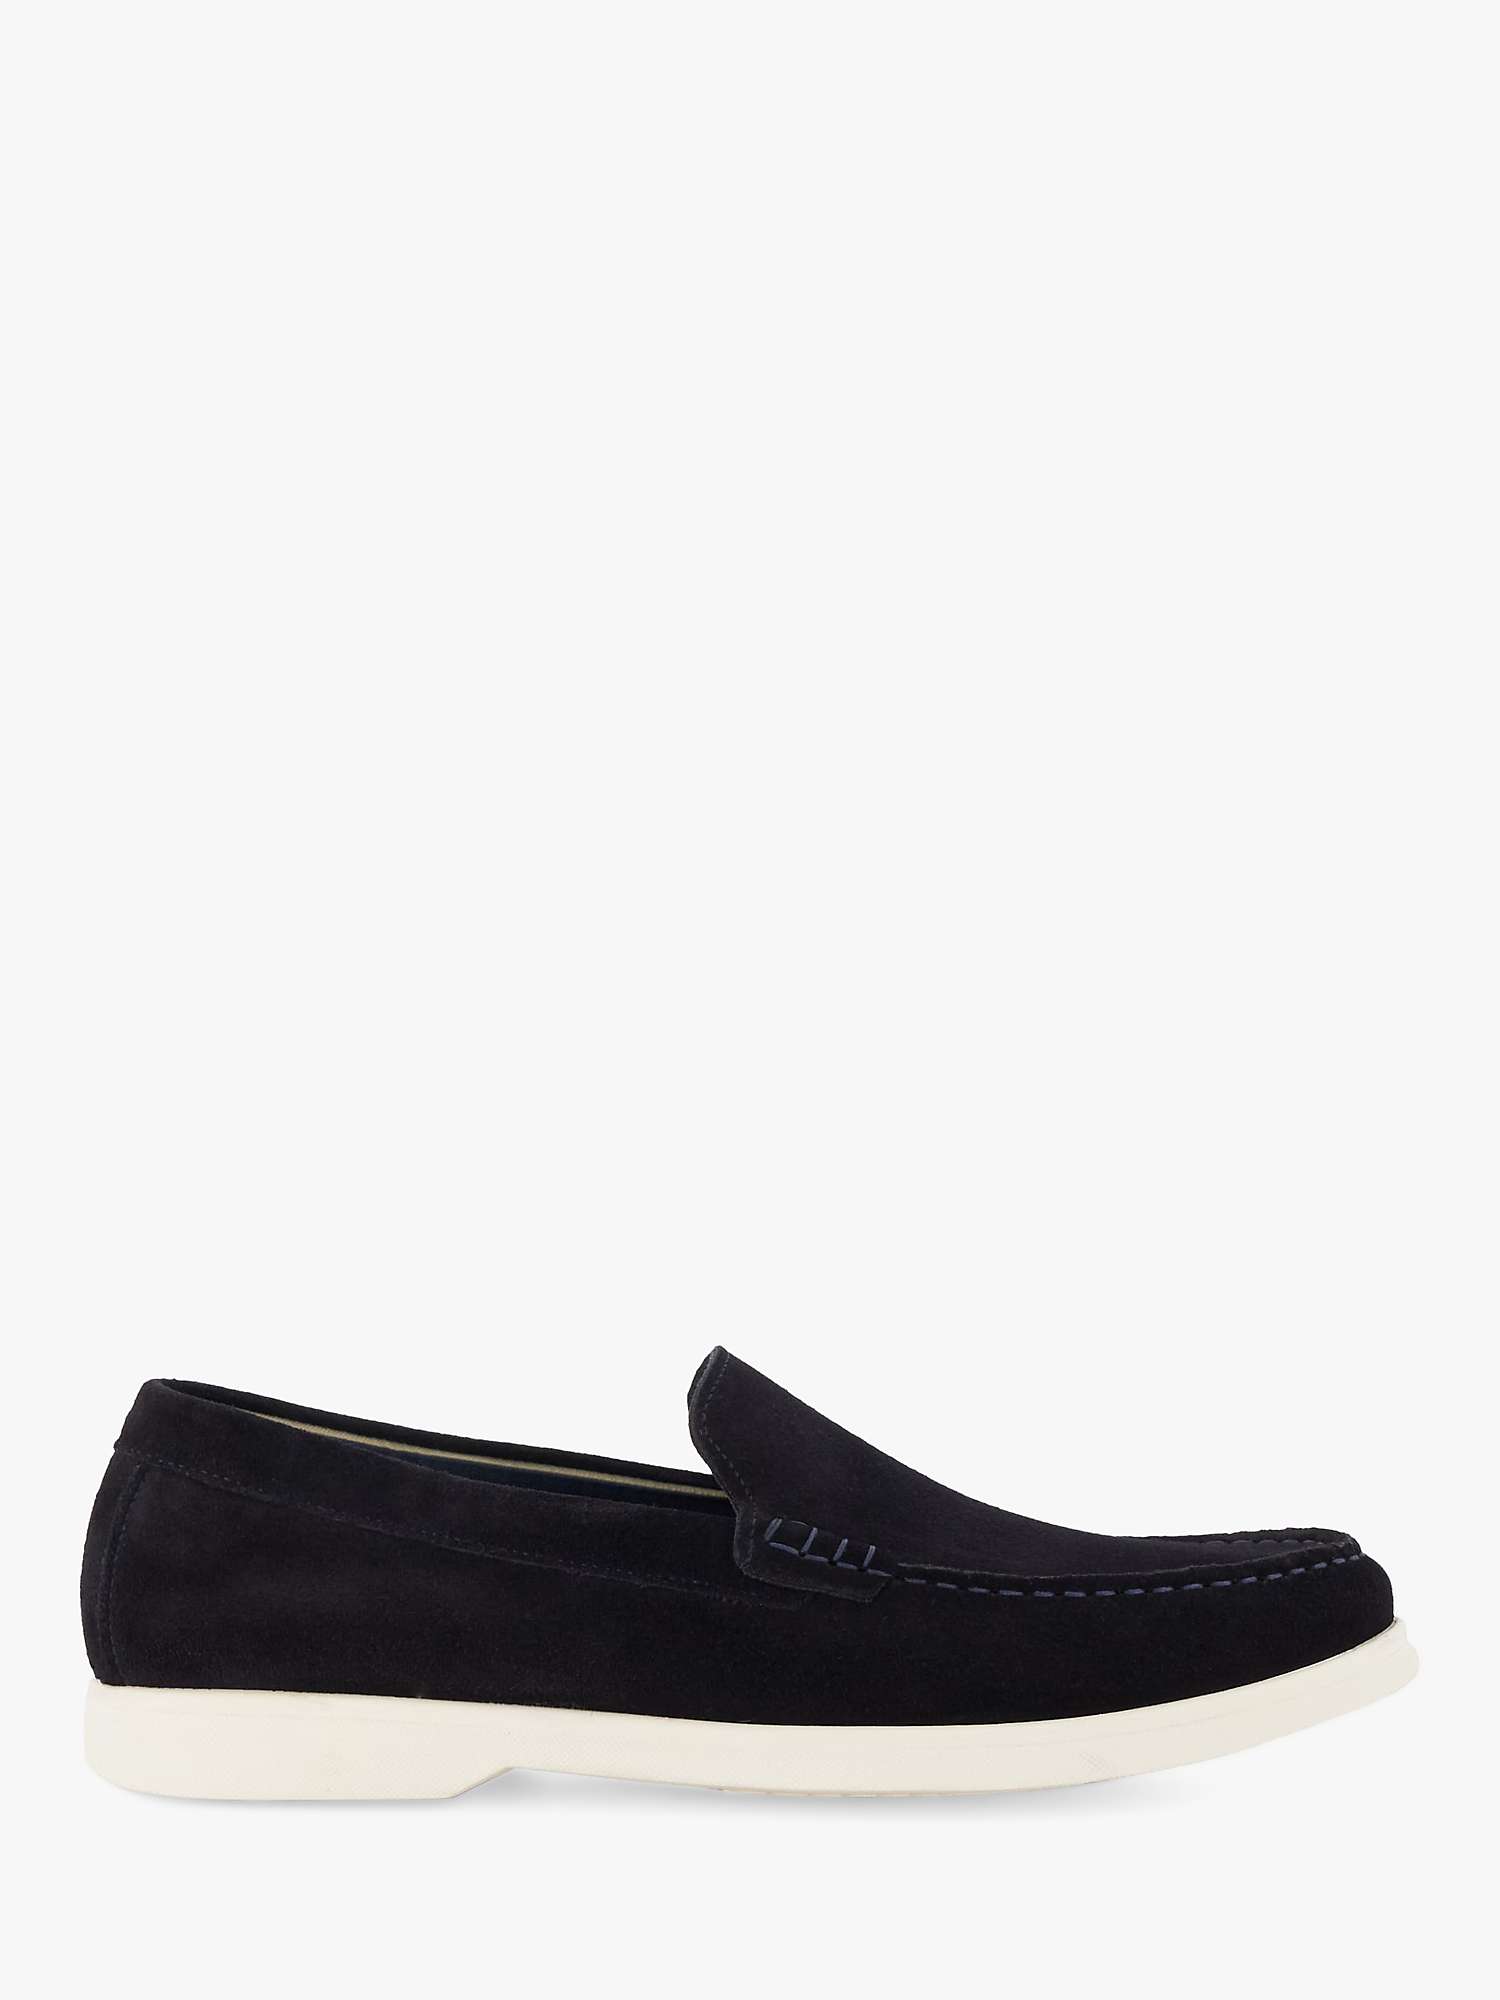 Buy Dune Buftonn Casual Suede Loafers Online at johnlewis.com